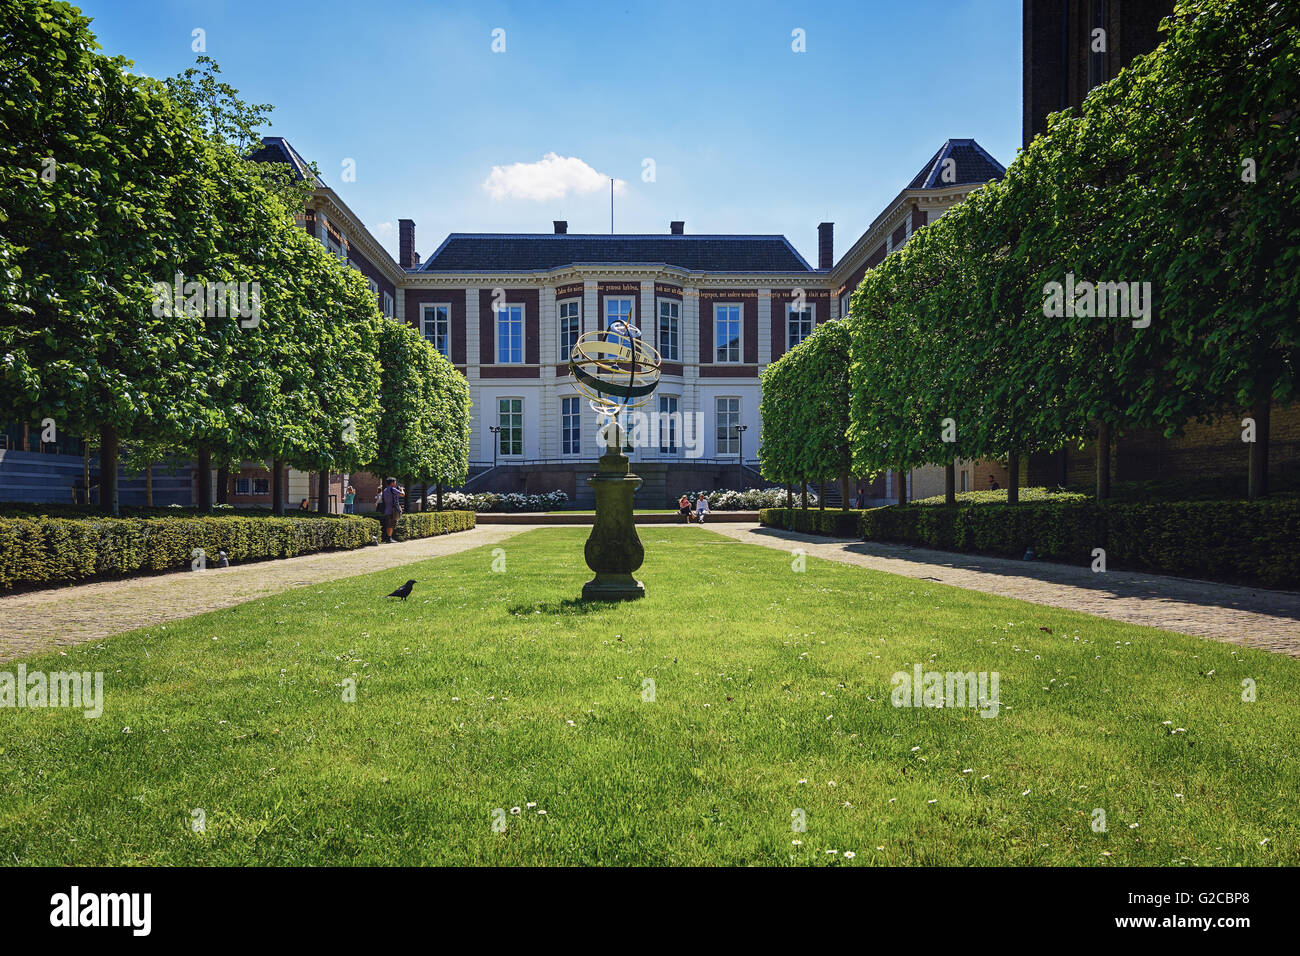 May 12, 2016 a picture of the French garden behind the building of the Council of States at The Hague in The Netherlands. Stock Photo